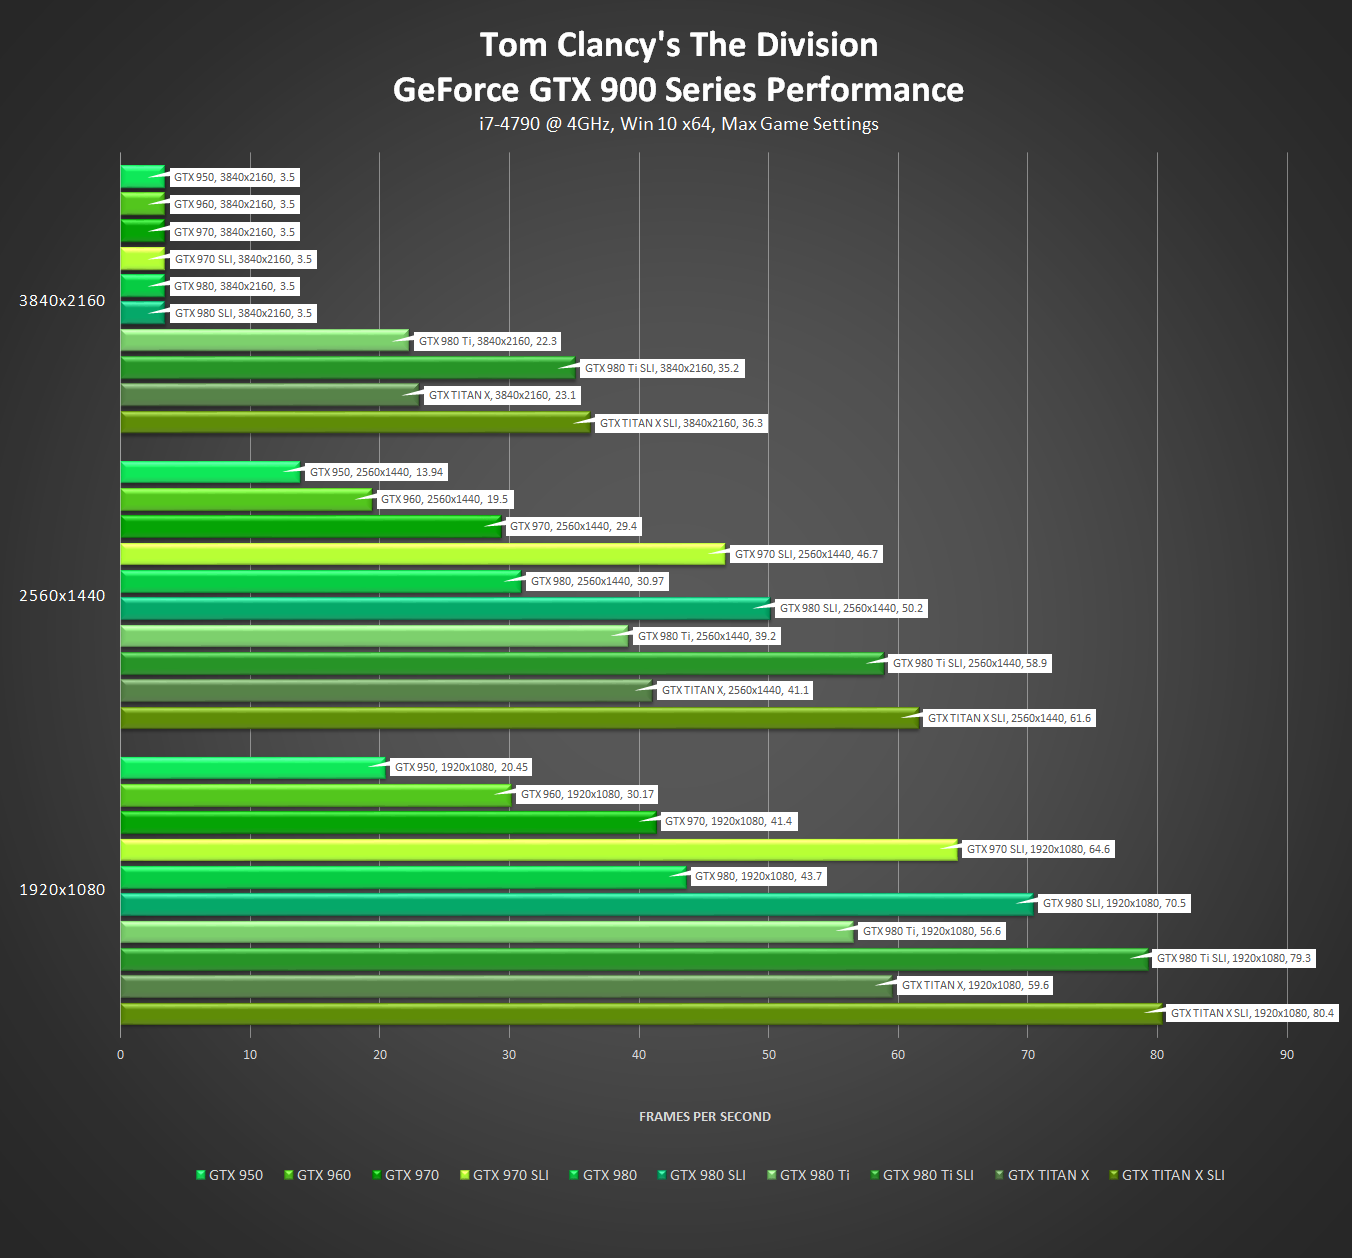 tom-clancys-the-division-nvidia-geforce-gtx-900-series-performance.png